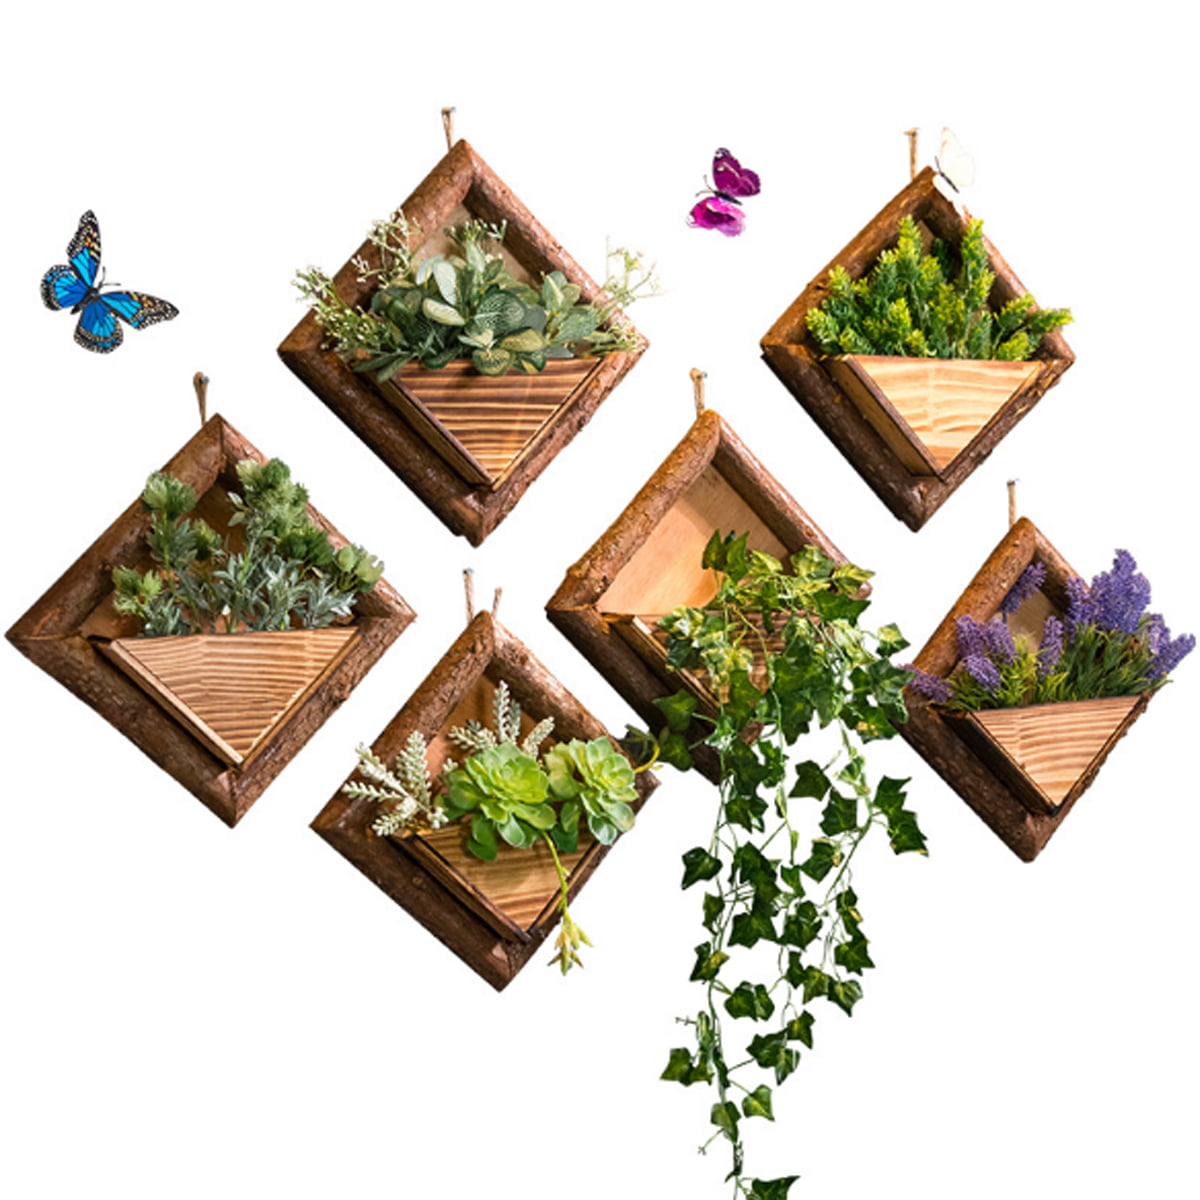 Download 1x Wooden Wall Mounted Shelf DIY Artificial Hanging Rack Flower Plant Display Stand Holder Home ...